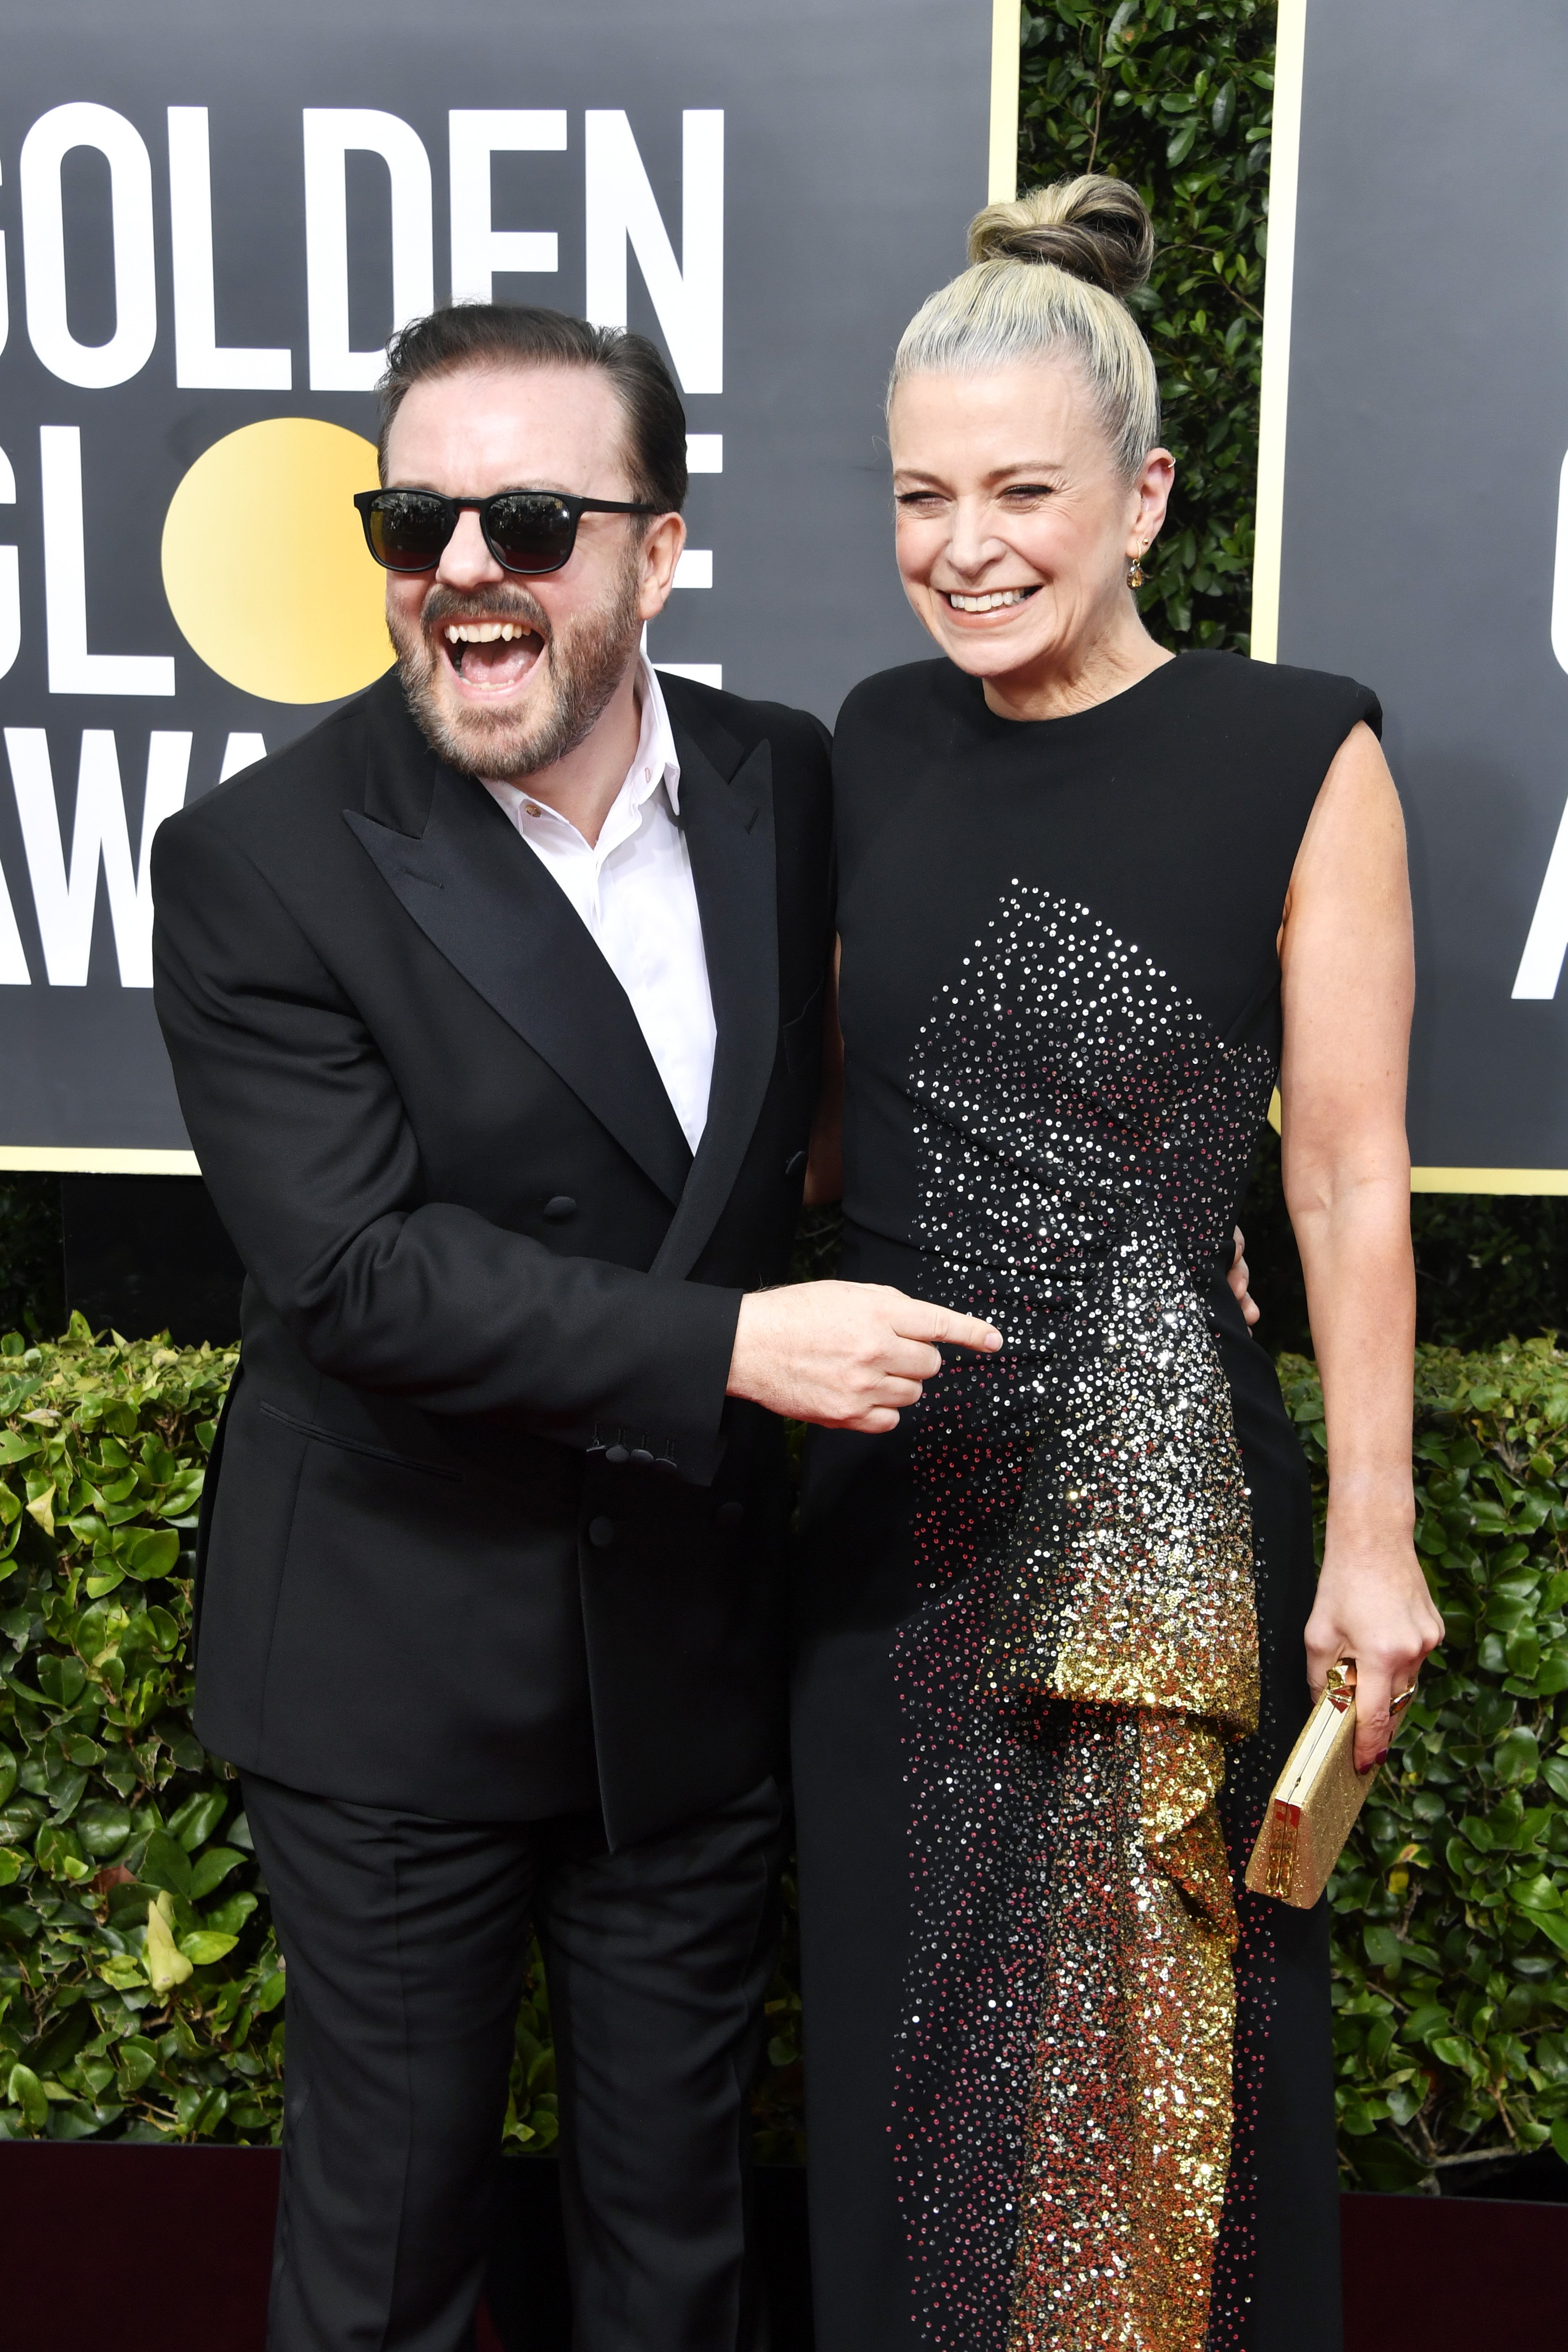 Ricky Gervais and Jane Fallon attend the 77th Annual Golden Globe Awards on January 5, 2020, in Beverly Hills, California. | Source: Getty Images